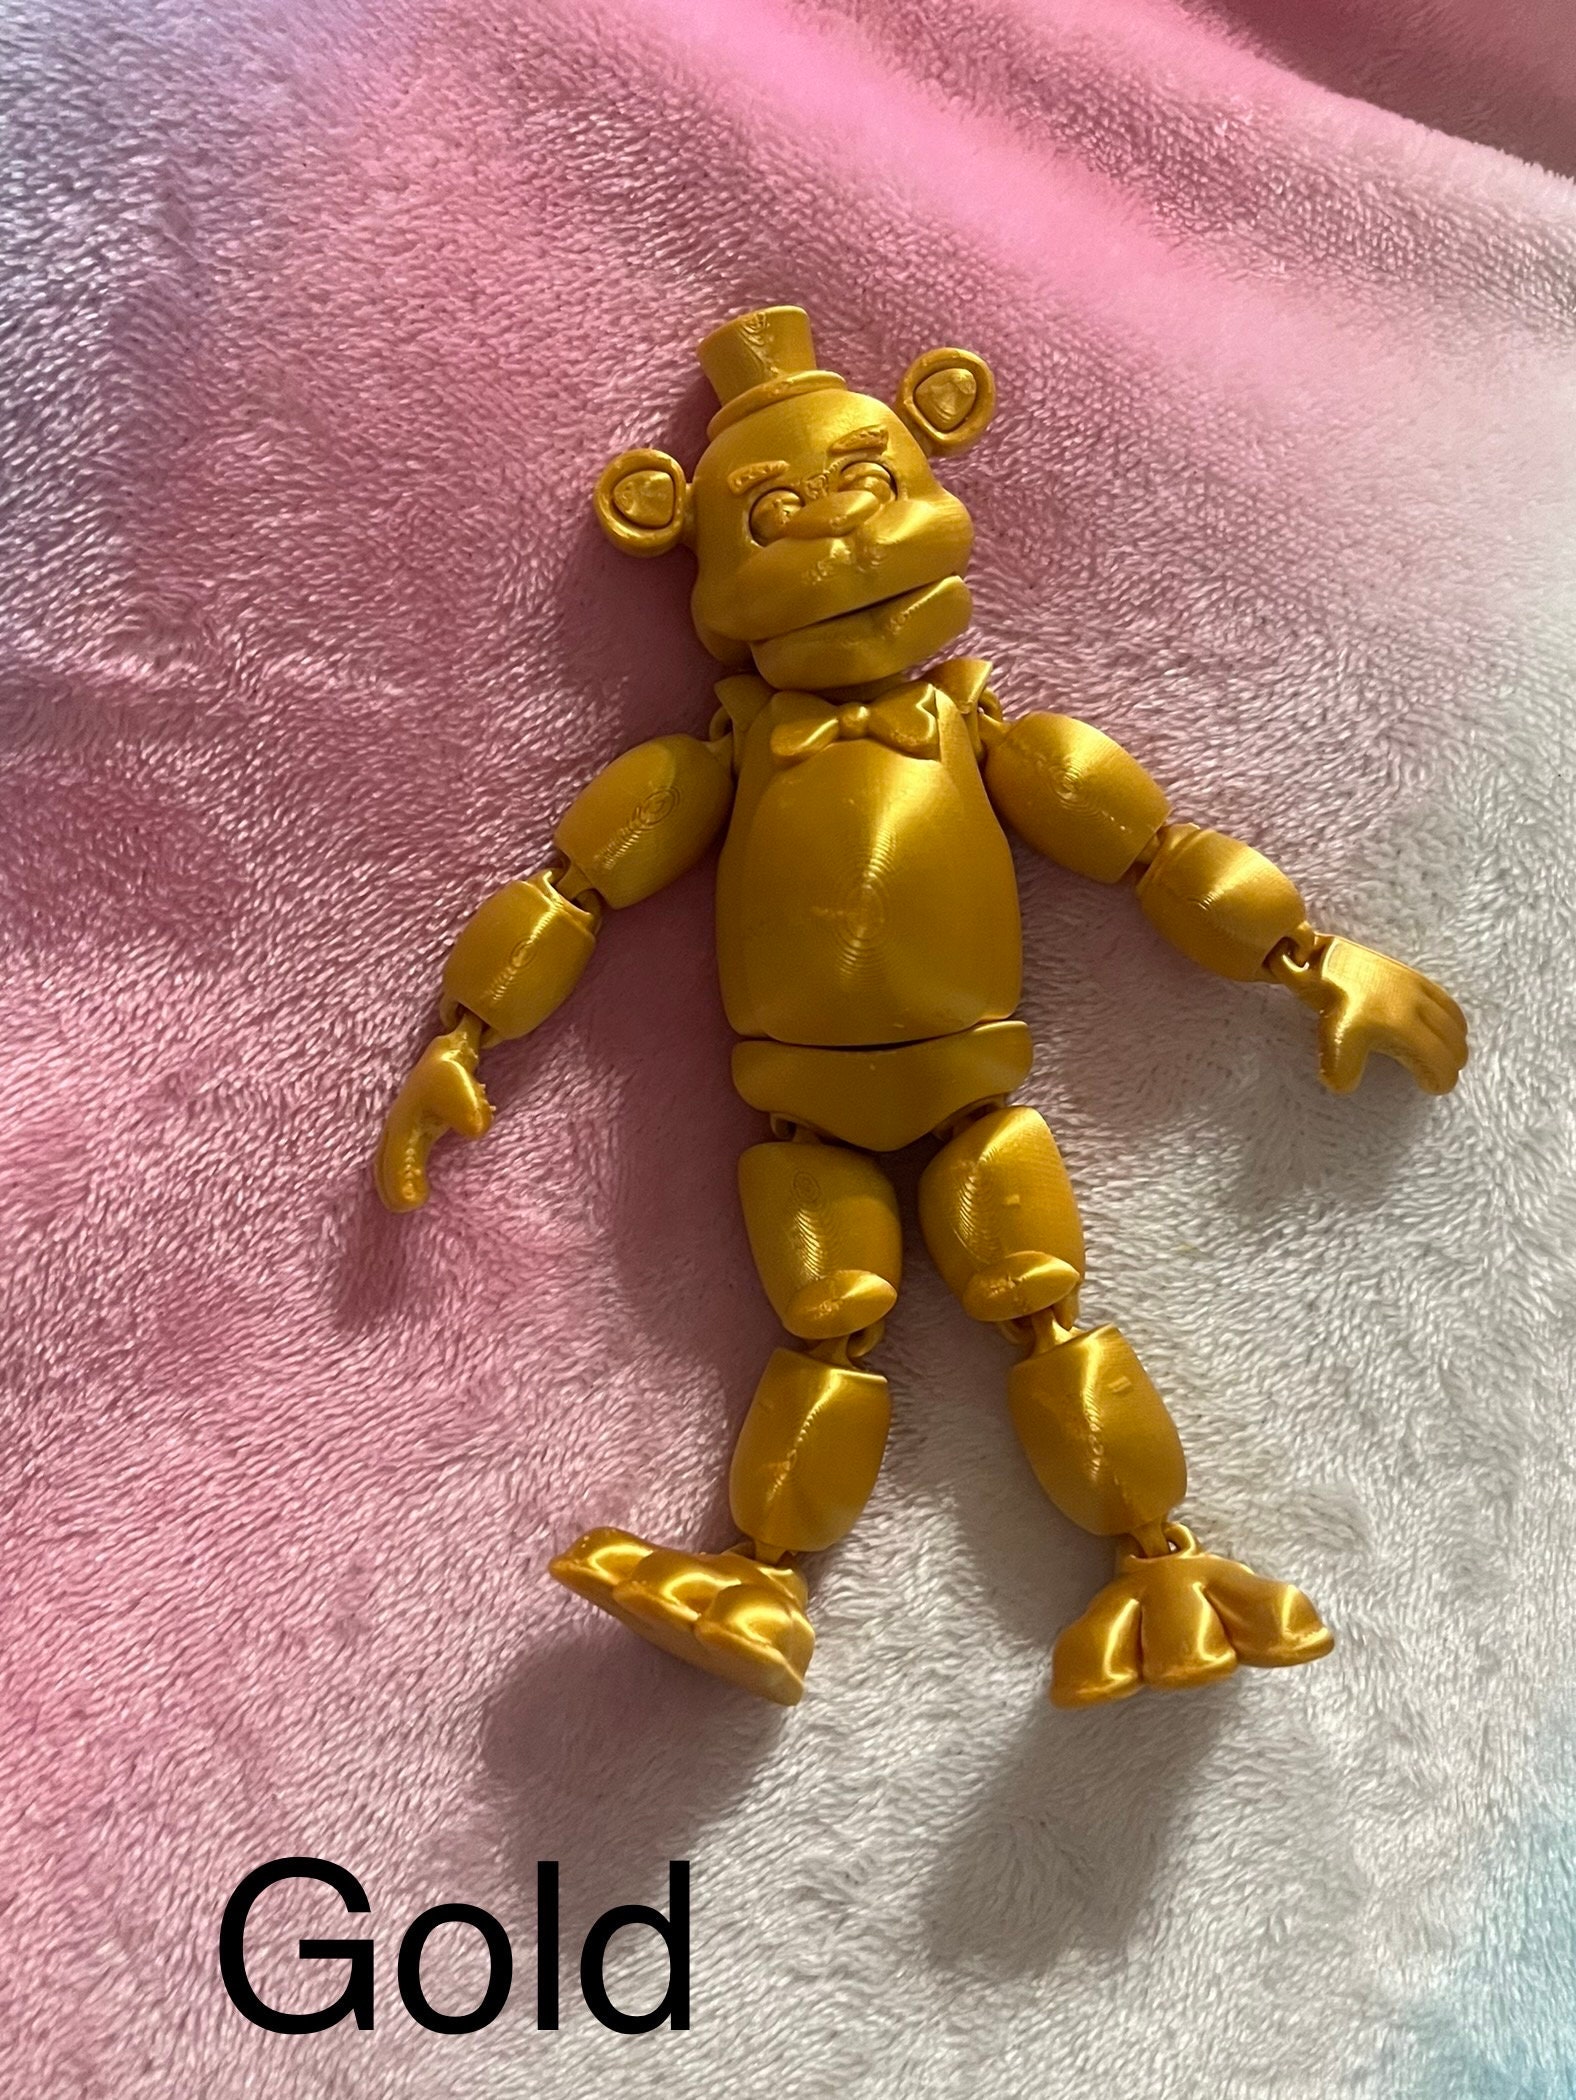 TOY MEXICAN FIGURE JUMBO FOXY FIVE NIGHTS AT FREDDY'S ANIMATRONICS 8 INCHES